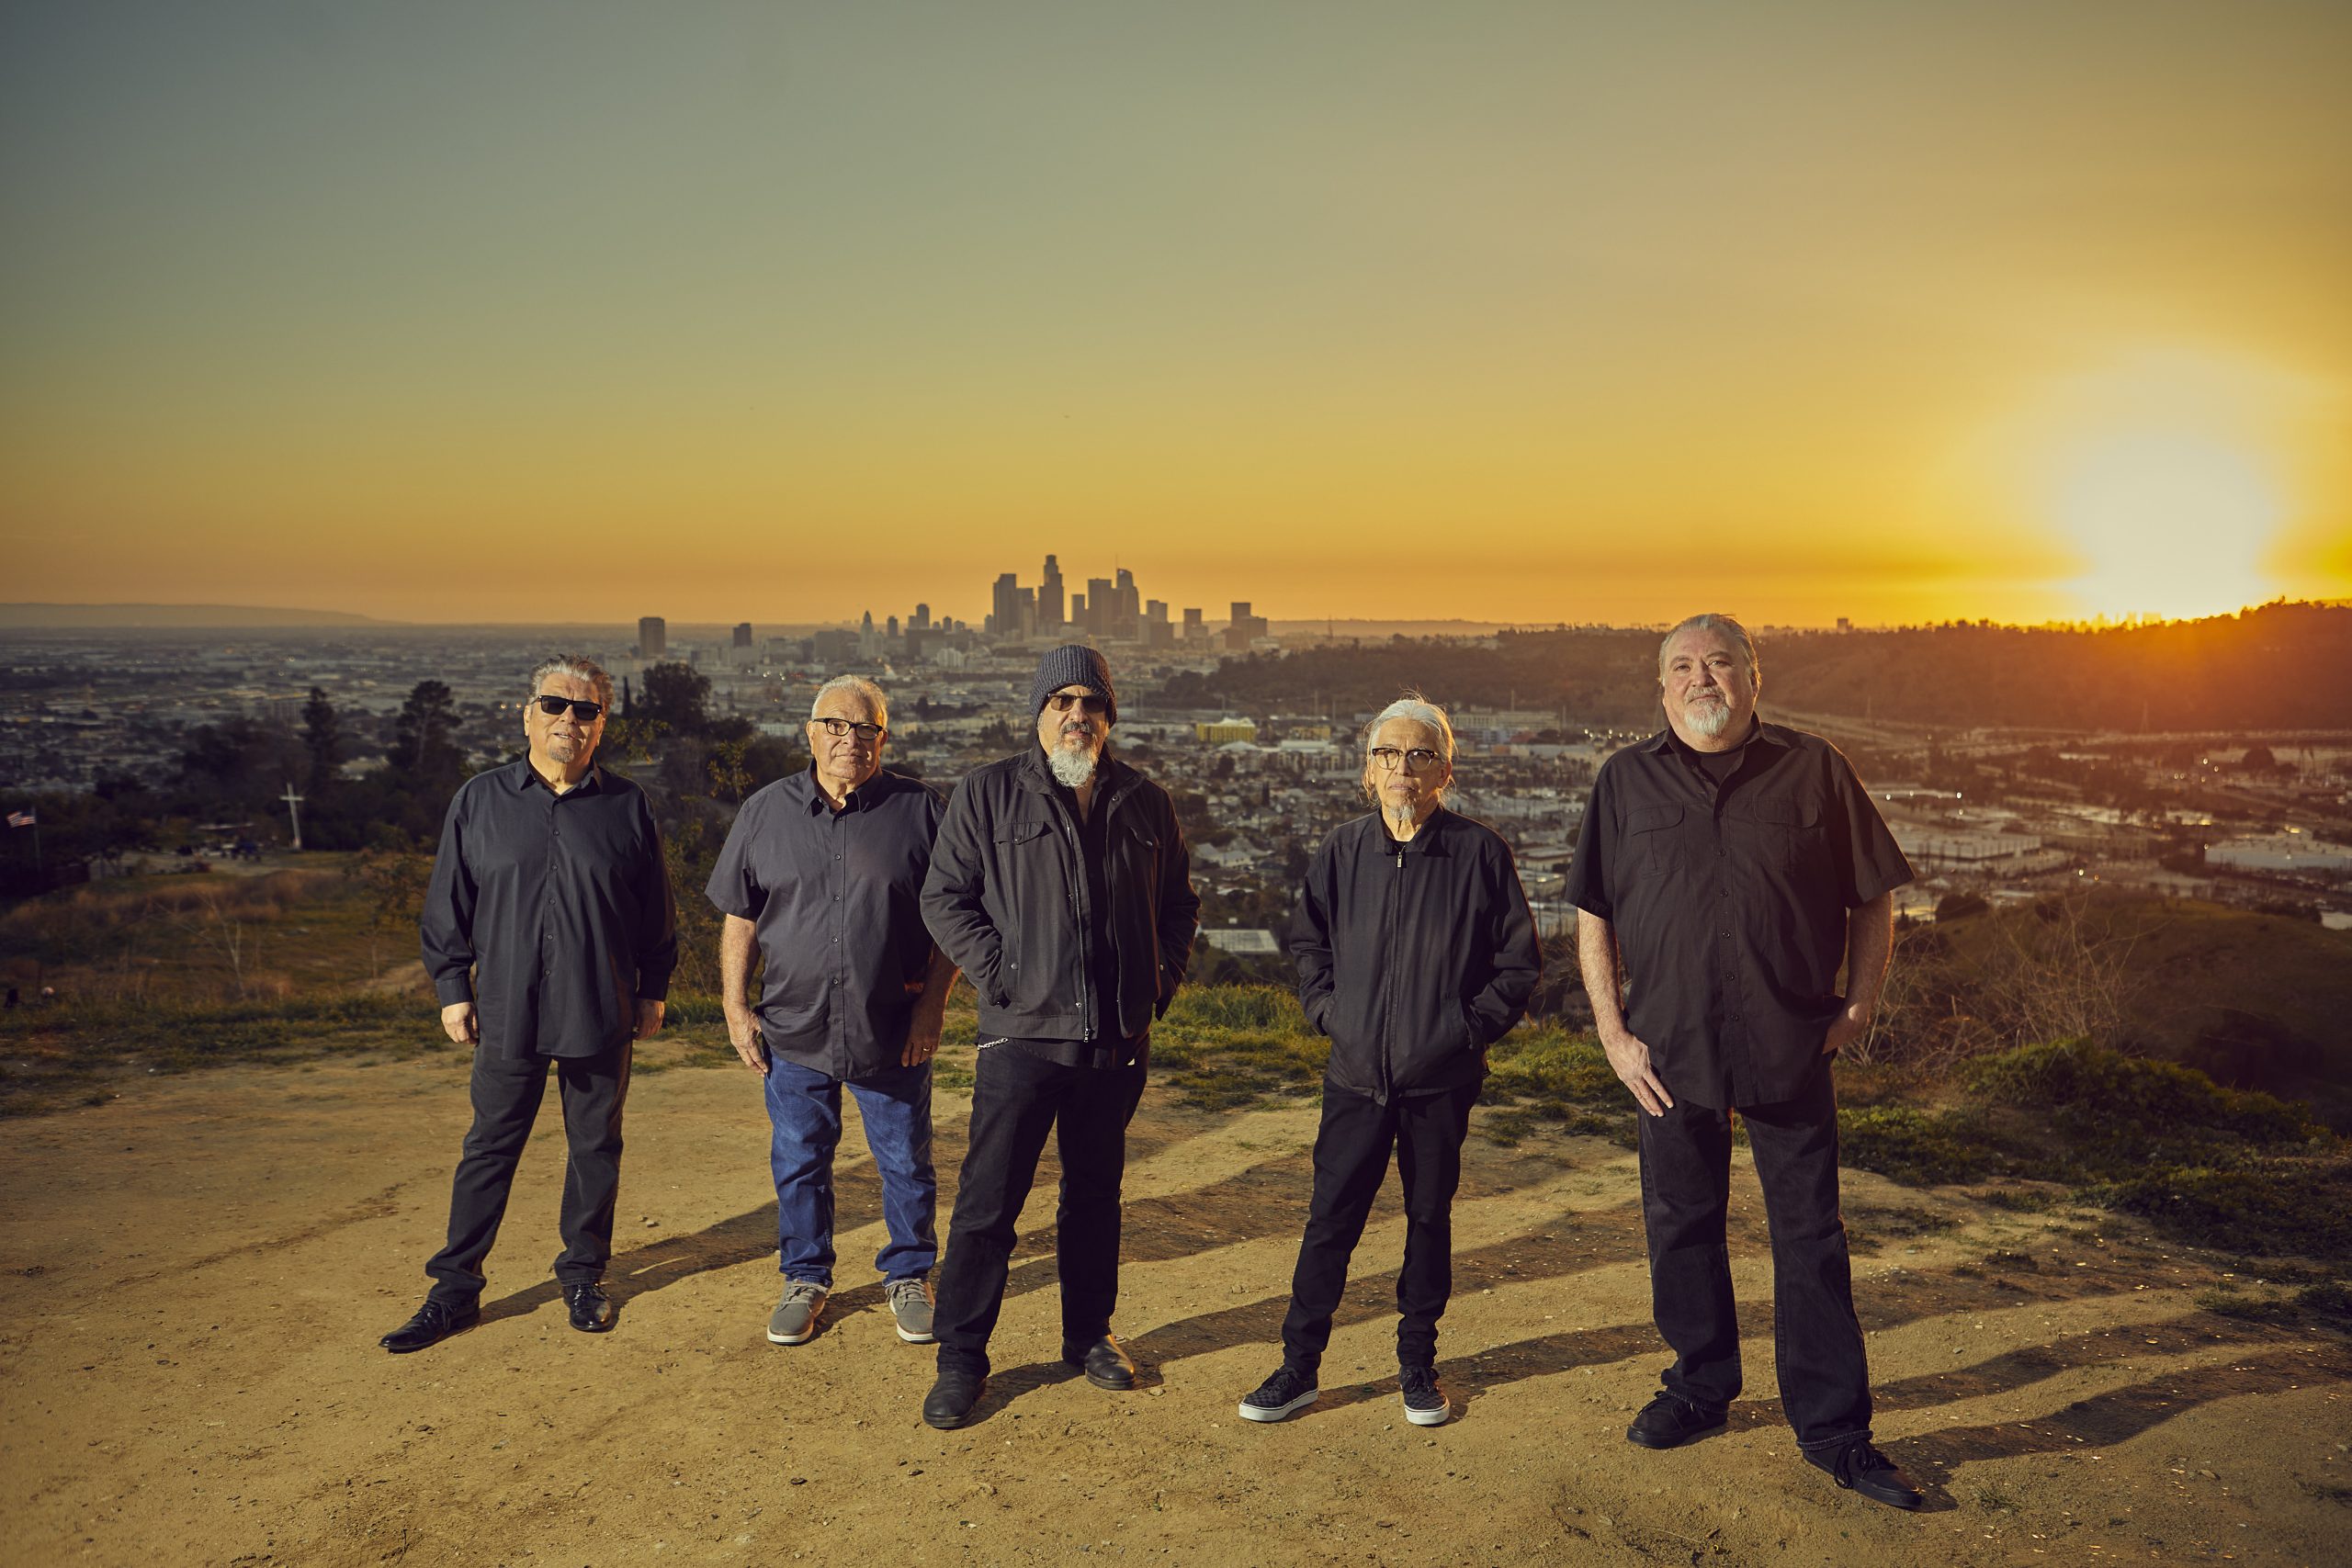 The Los Lobos band standing in front of a sunset